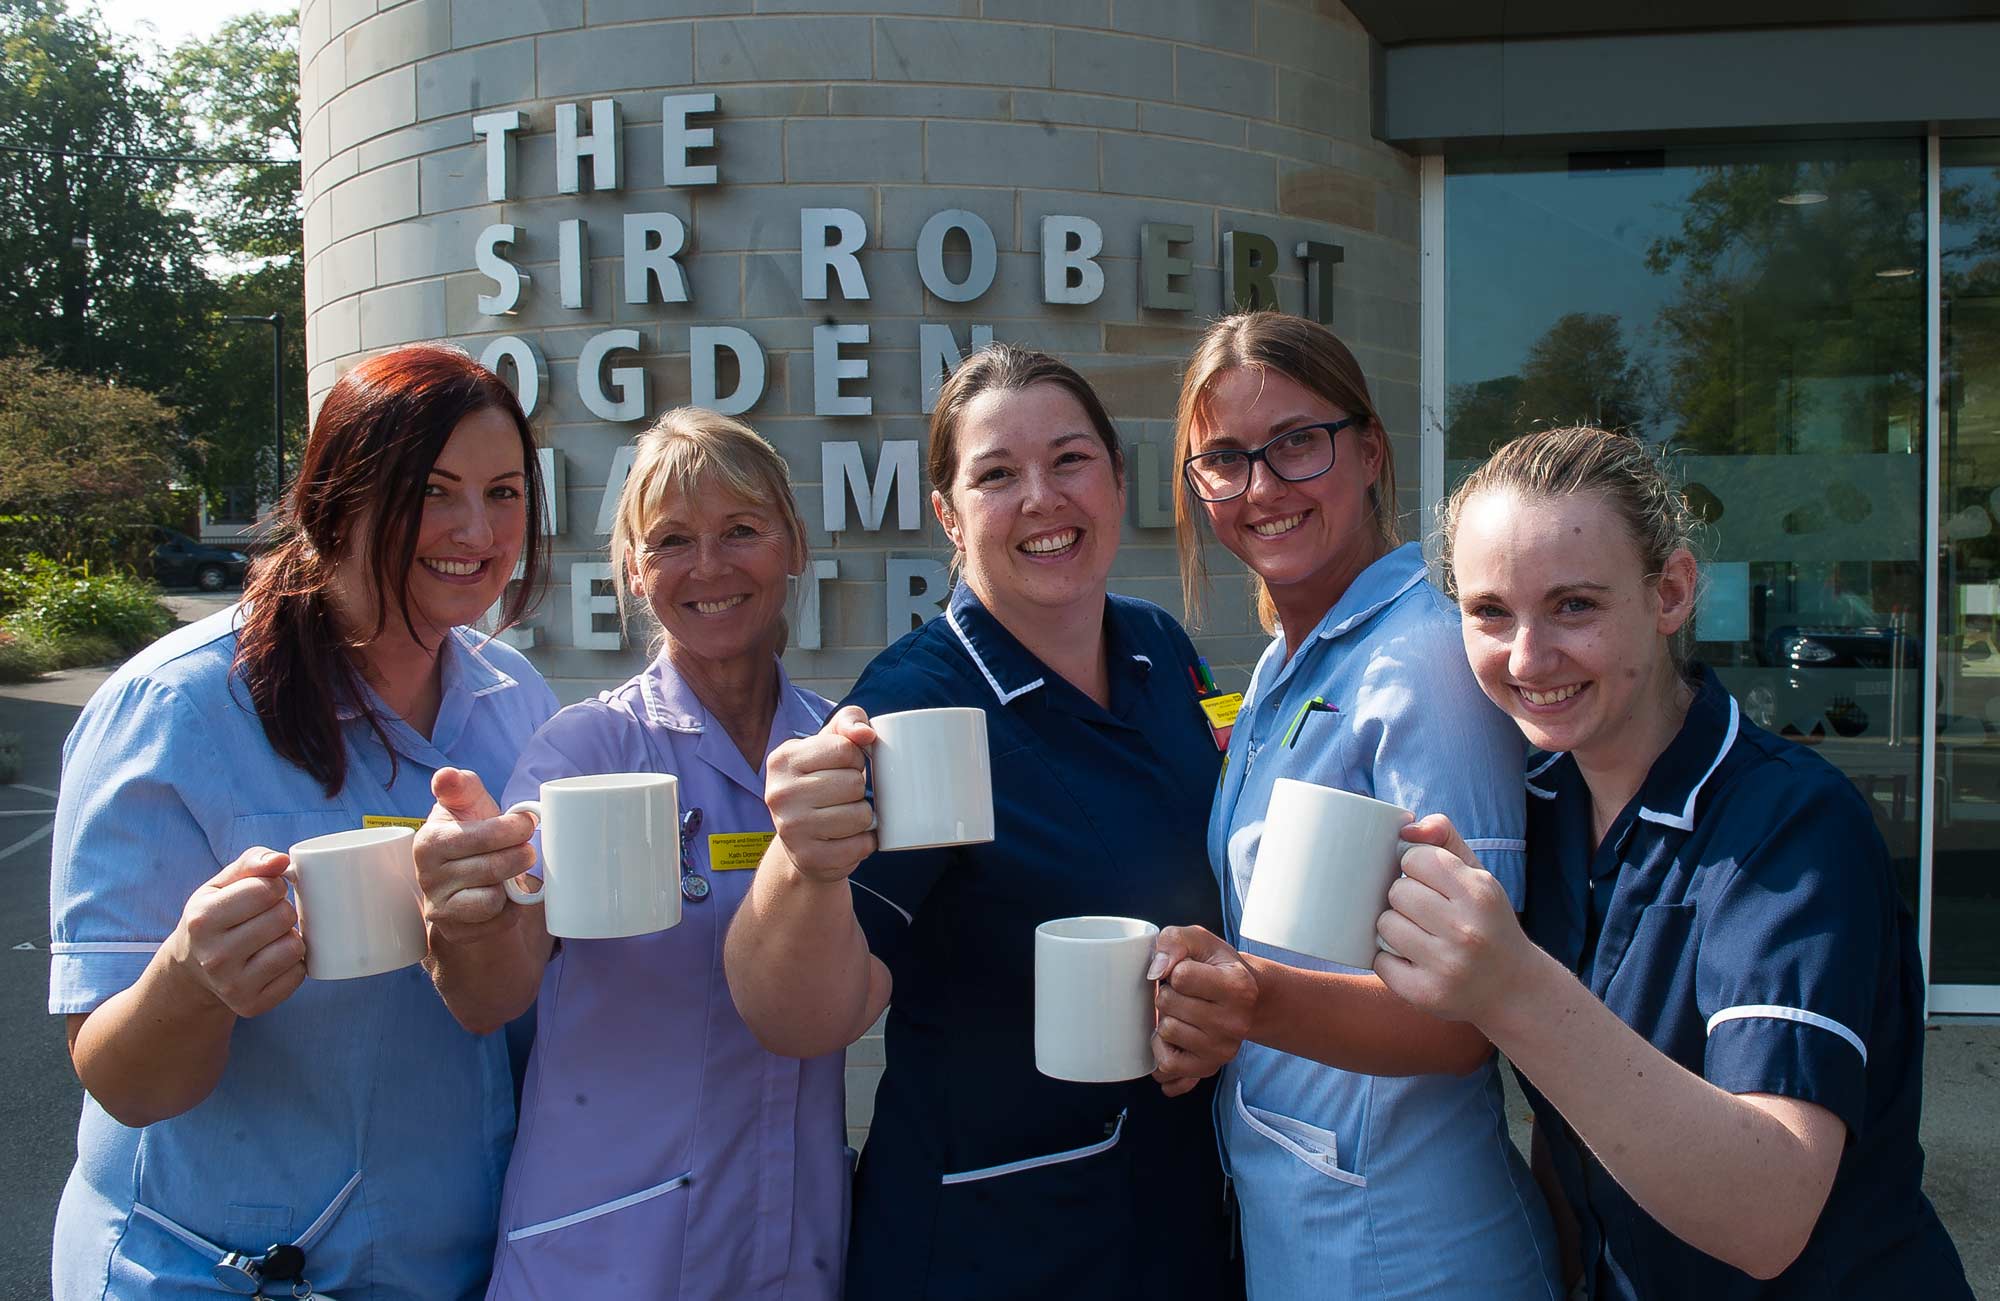 Nurses from the Sir Robert Ogden Macmillan Centre are supporting the World’s Biggest Coffee Morning